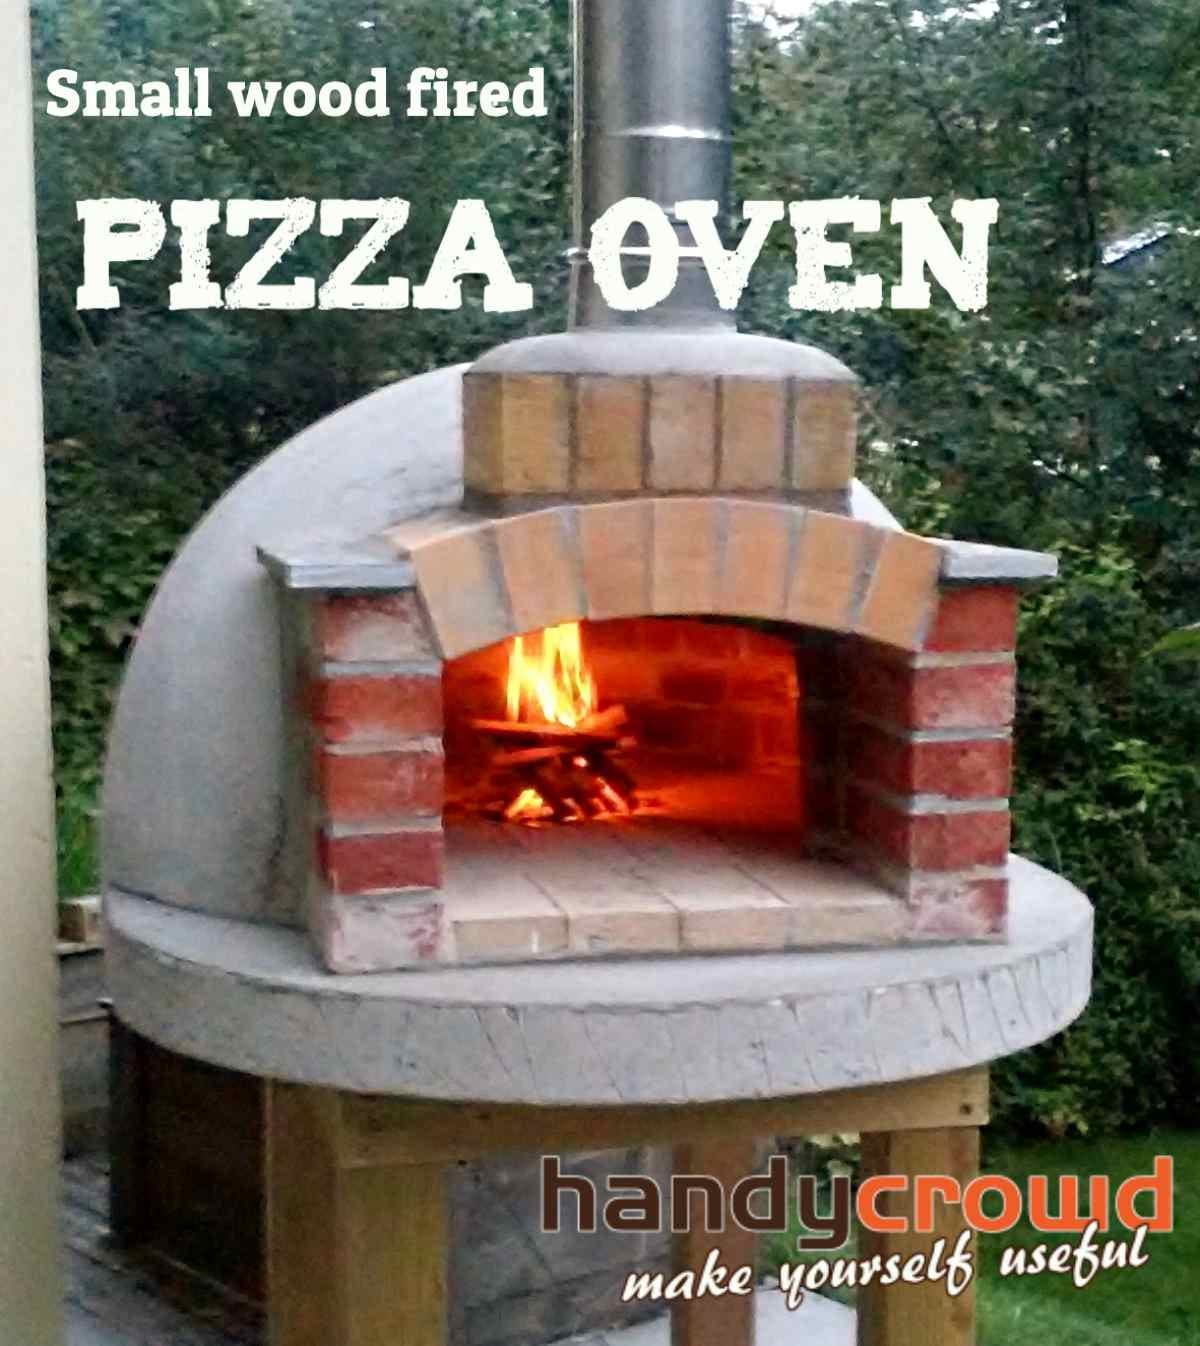 Building a Small Wood Fired Pizza Oven | by Ian Anderson | Medium